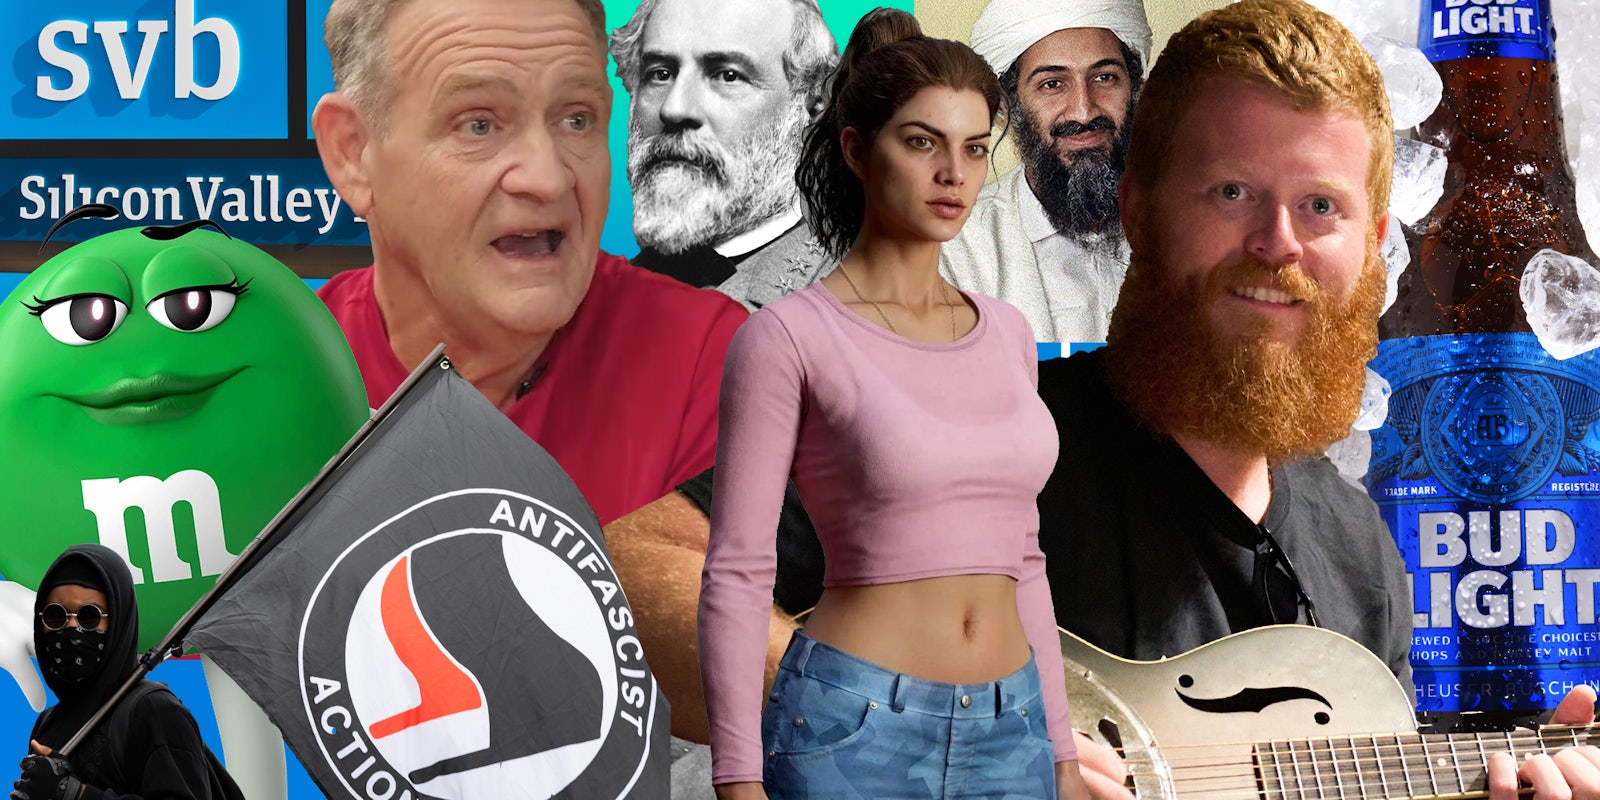 2023 weird news, lady m&ms, silicon valley bank, budlight, antifa, oliver anthony, larry sinclair, robert e lee, osama bin laden, grand theft new main character in a collage